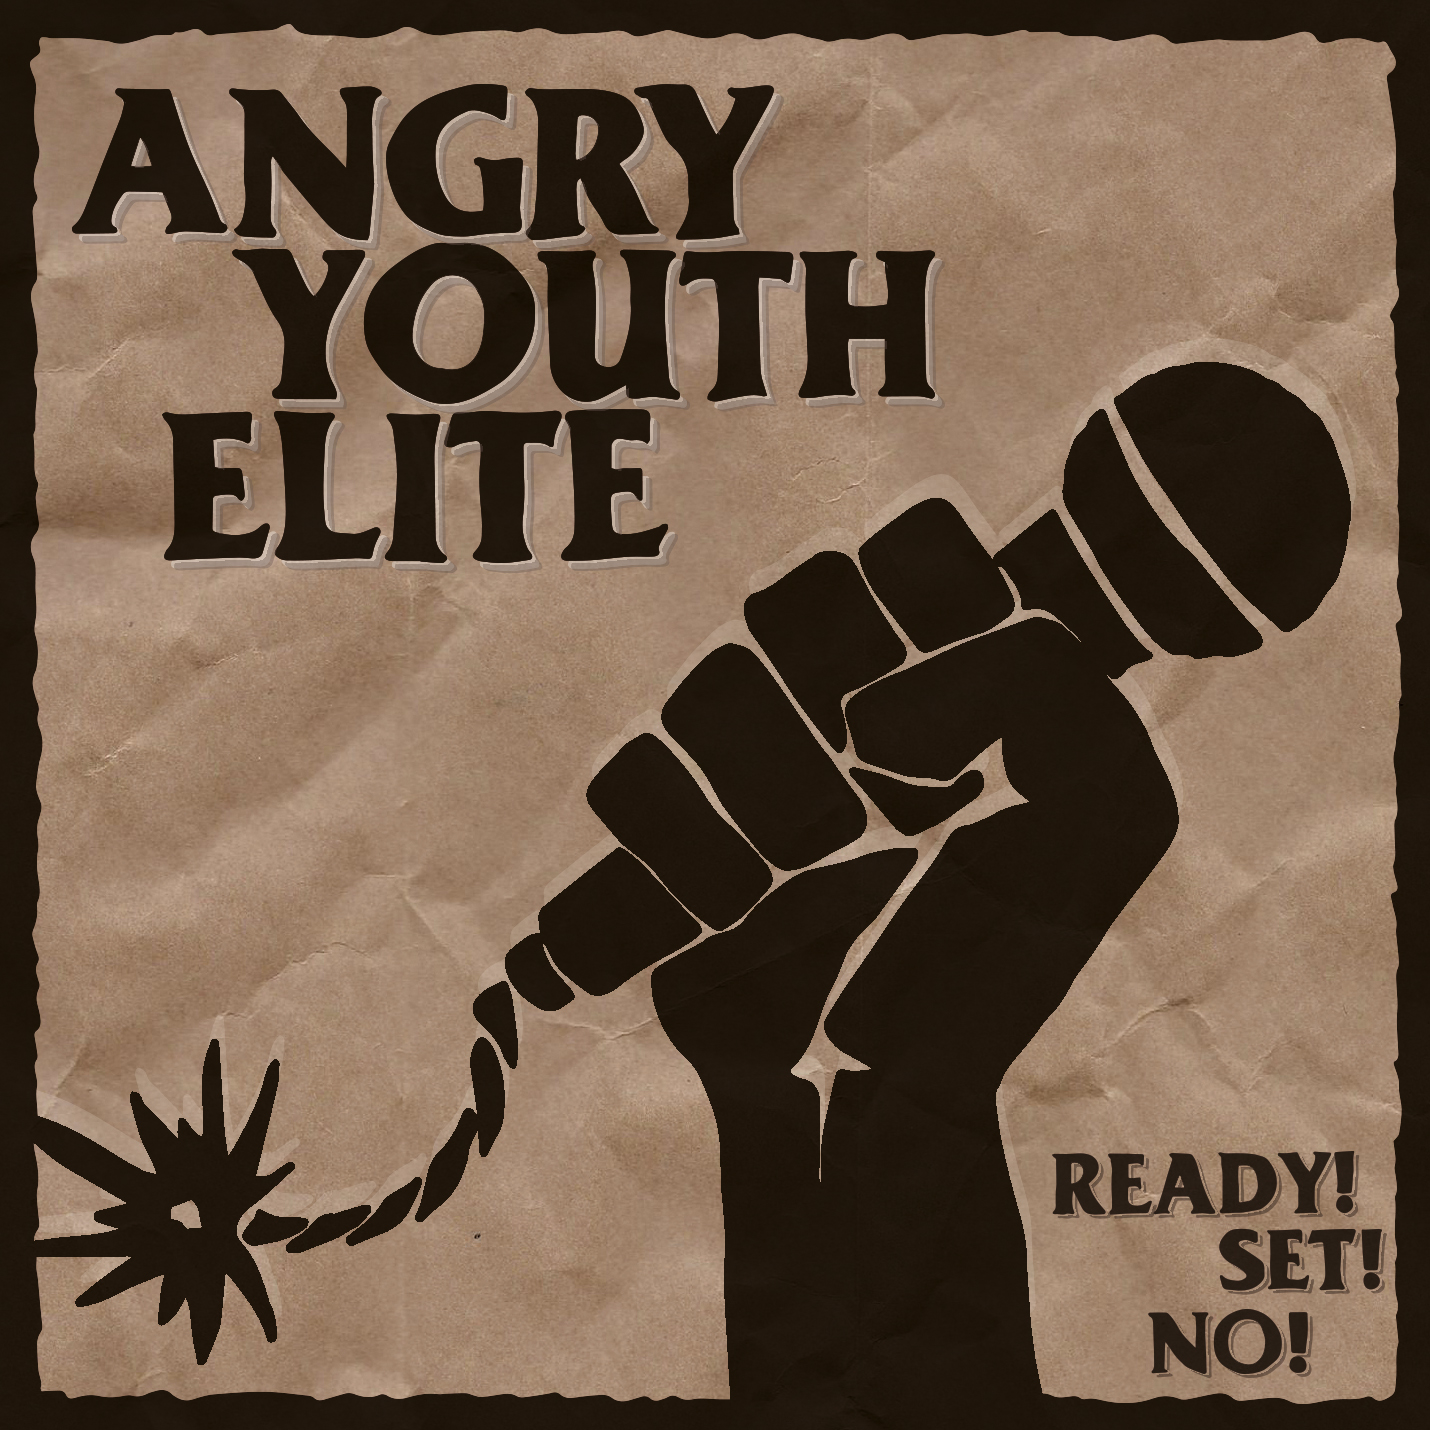 Angry Youth Elite Cover Readyy!Set!No!